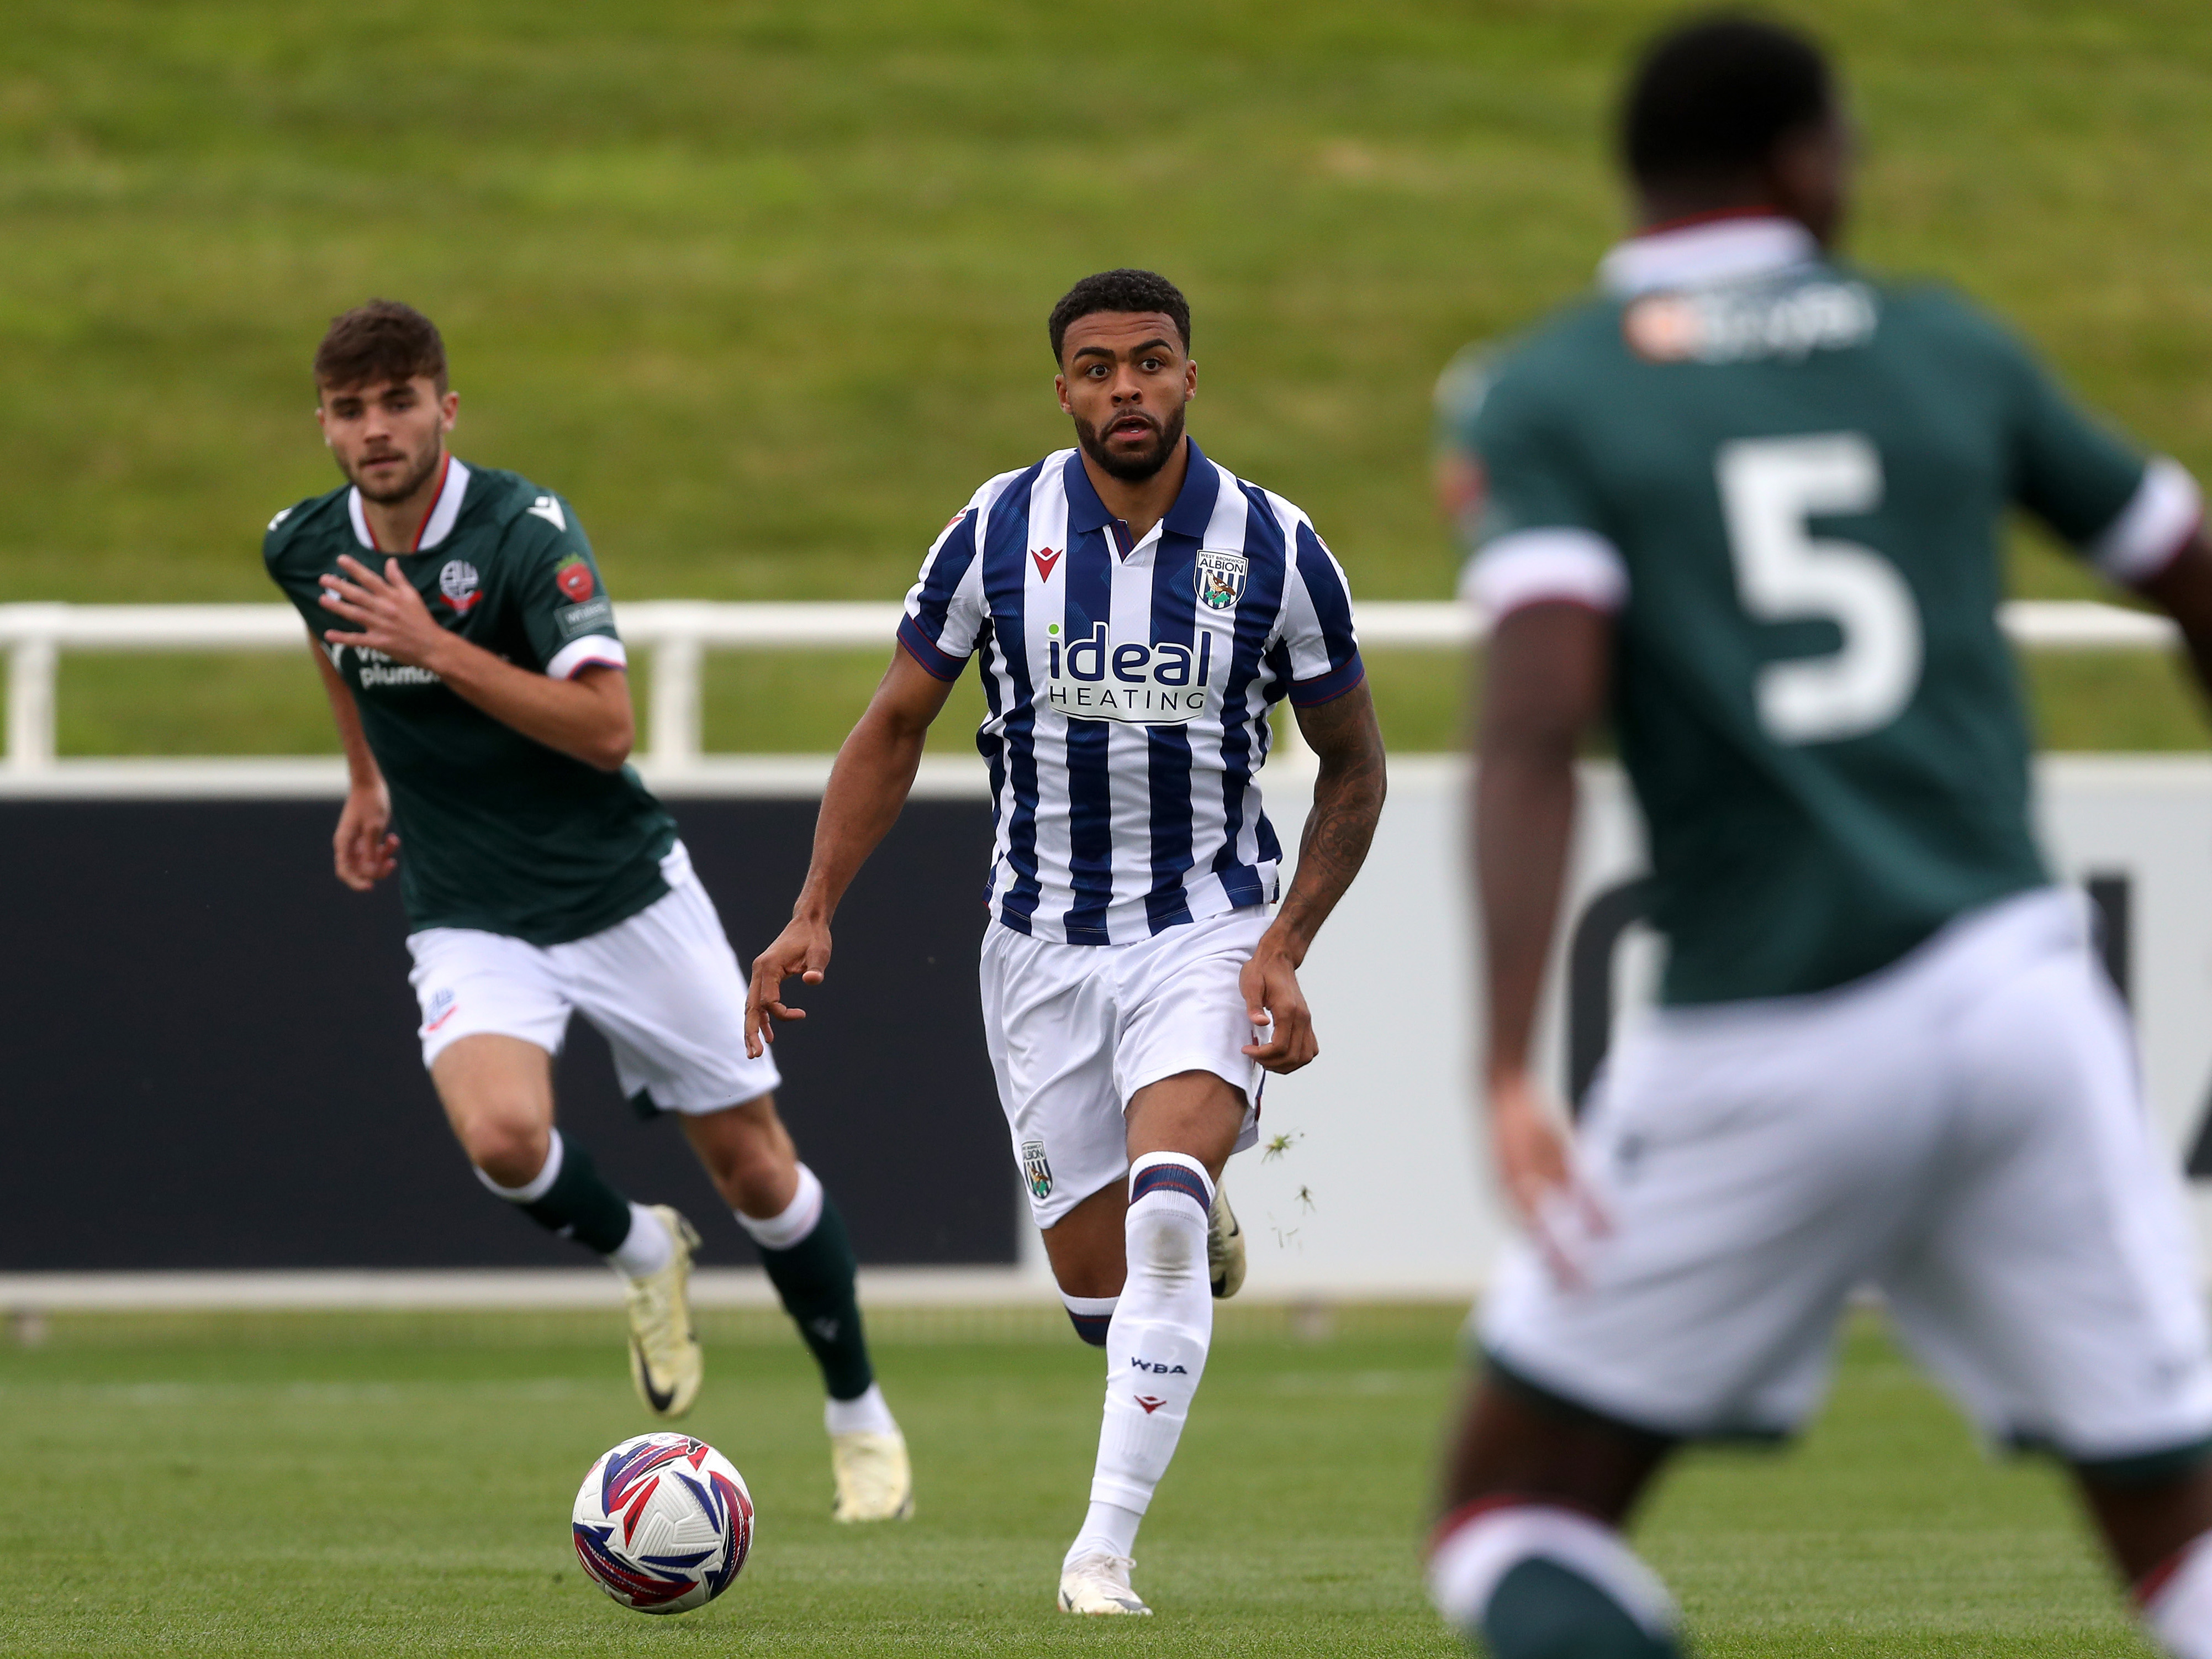 Darnell Furlong running with the ball during a pre-season fixture against Bolton Wanderers at St George's Park